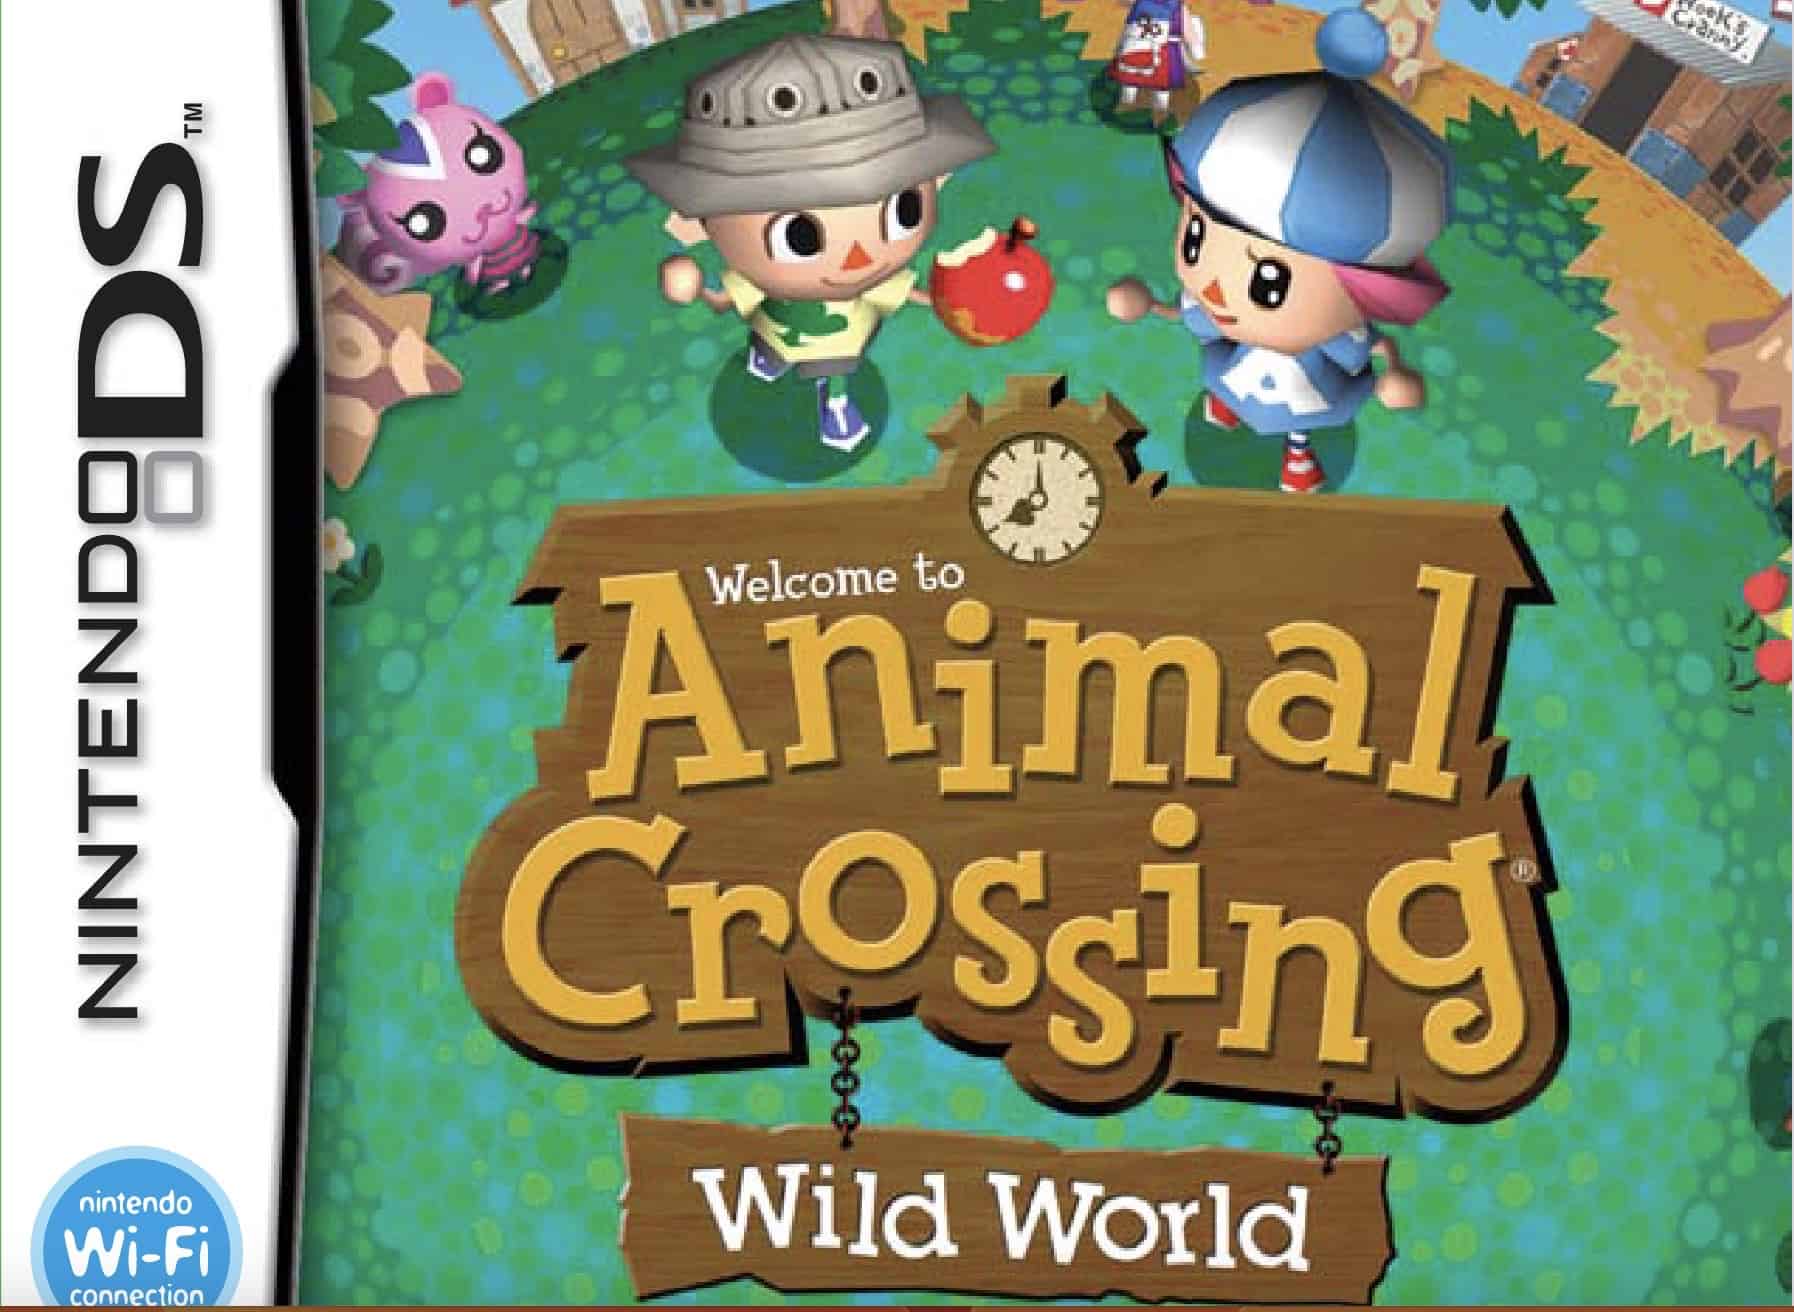 <p>The next major release in the series is <em>Wild World</em>, the first handheld entry for <em>Animal Crossing</em>. It debuted on the Nintendo DS from developer Nintendo EAD in 2005. The game, once again, is a simulation that follows a similar format to the previous entries. This game adds a lot of customization options not previously available, like more control of appearance and in-depth environment layout changes, including constellations in the sky.</p>    <p>Once again, you meet Tom Nook and receive a house that puts you in debt. You'll perform tasks and errands, including more options than before to pay off the debt and expand your home. The game adds in new characters, new holidays to celebrate in town, new fish to catch, and more.</p>    <p><em>Wild World</em> keeps the internal clock aspect from the last game but drops the option to collect Nintendo games. This entry is the first in the series to have a real multiplayer option. You can visit other people's towns and trade with them, but you'll need a friend code, so no random visits. The multiplayer functions through the Nintendo Wi-Fi Connection, which no longer exists since 2014. The series' popularity continues to grow, with this title providing a stage for battling in the 2008 <em>Super Smash Bros Brawl</em>.</p><p>Want to see more content like this on your Microsoft Start page?</p> <p>Simply click “Follow” near the headline of this article.</p> <p>After that, be sure to let us know what you think about this content in the comments!</p>